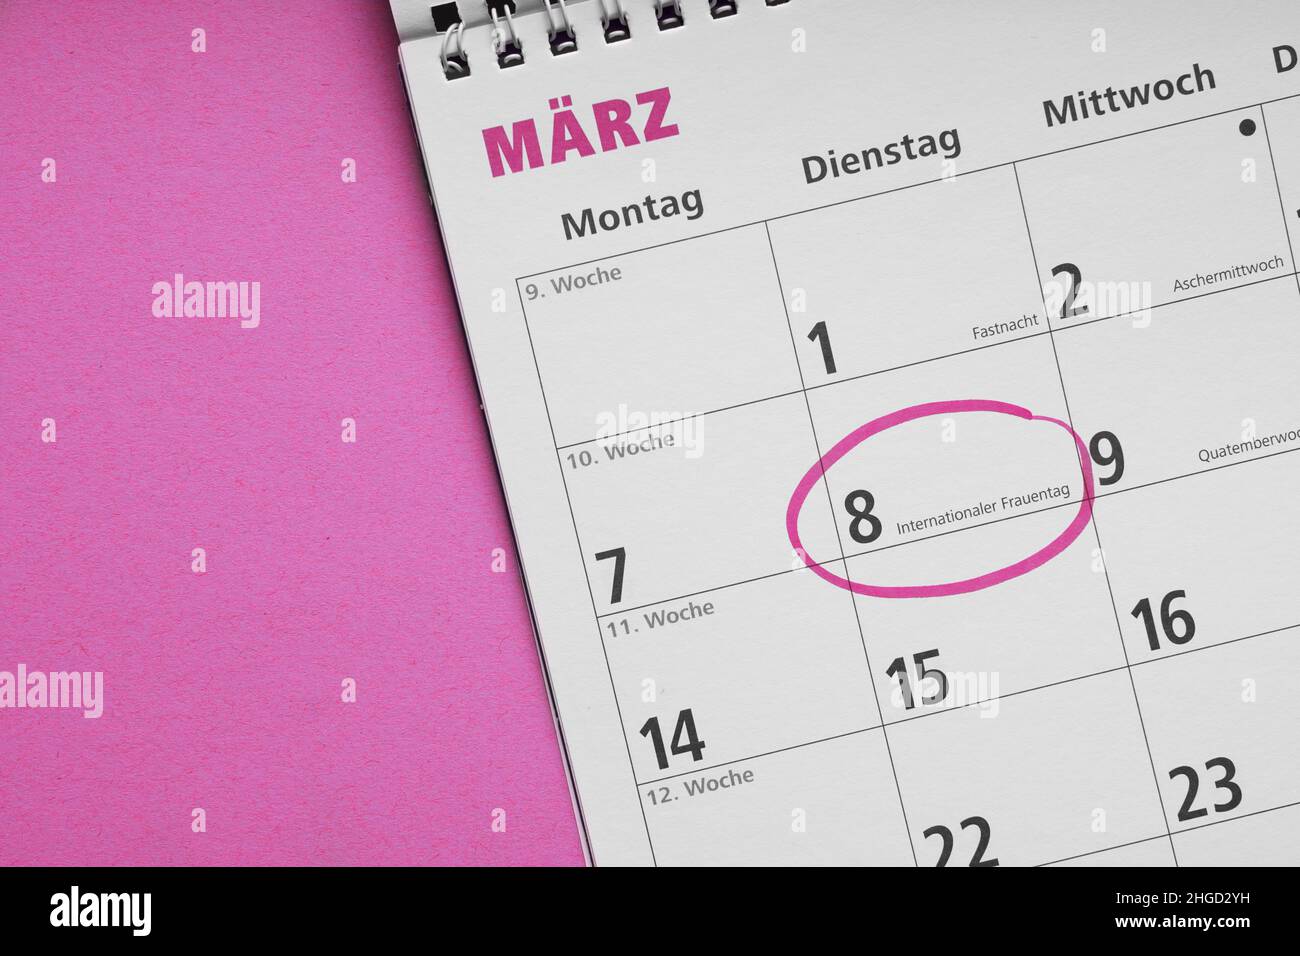 Internationaler Frauentag or international women's day on March 8 is circled in german calendar Stock Photo